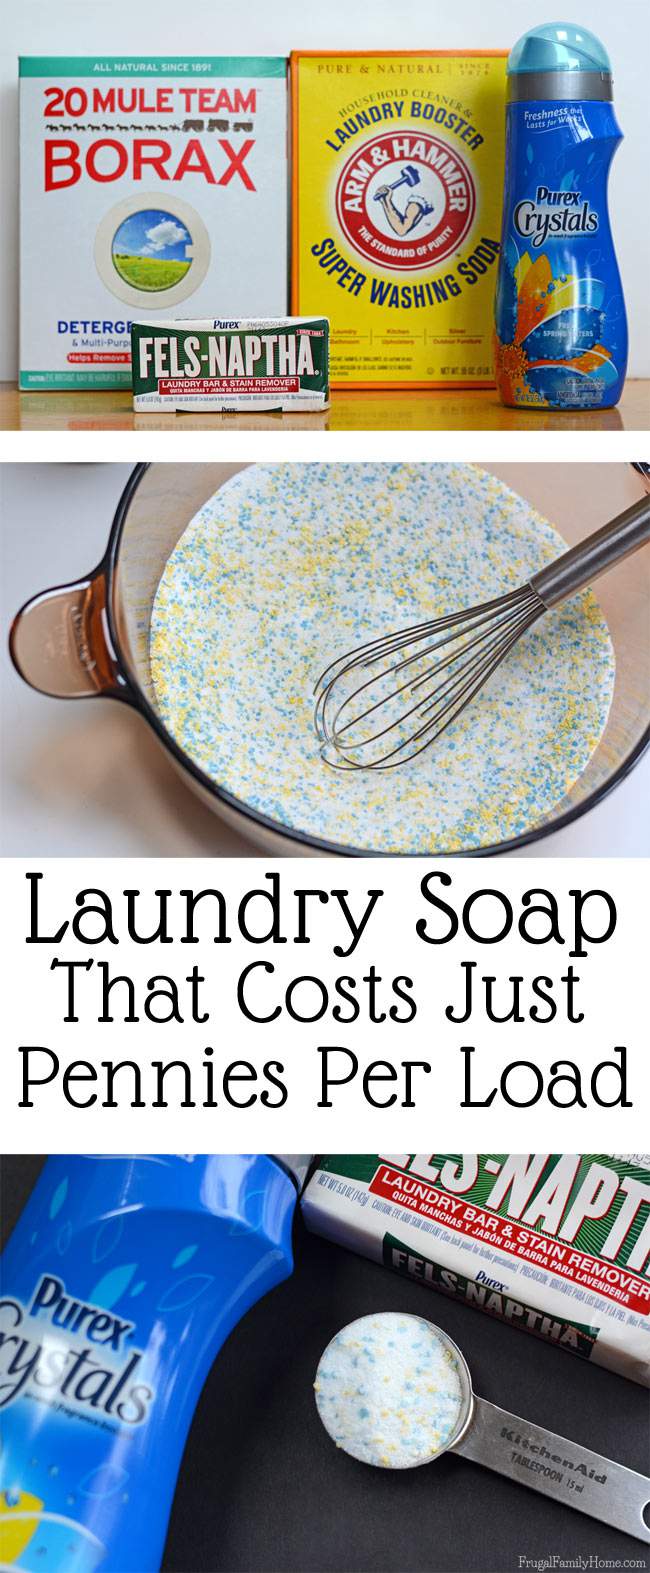 Making your own laundry detergent can really save you money. This diy laundry soap cost only pennies per load and cleans really well. I’ve been using it for years now and it worked great in my top loading washer and works just as good in my front loading washer too.